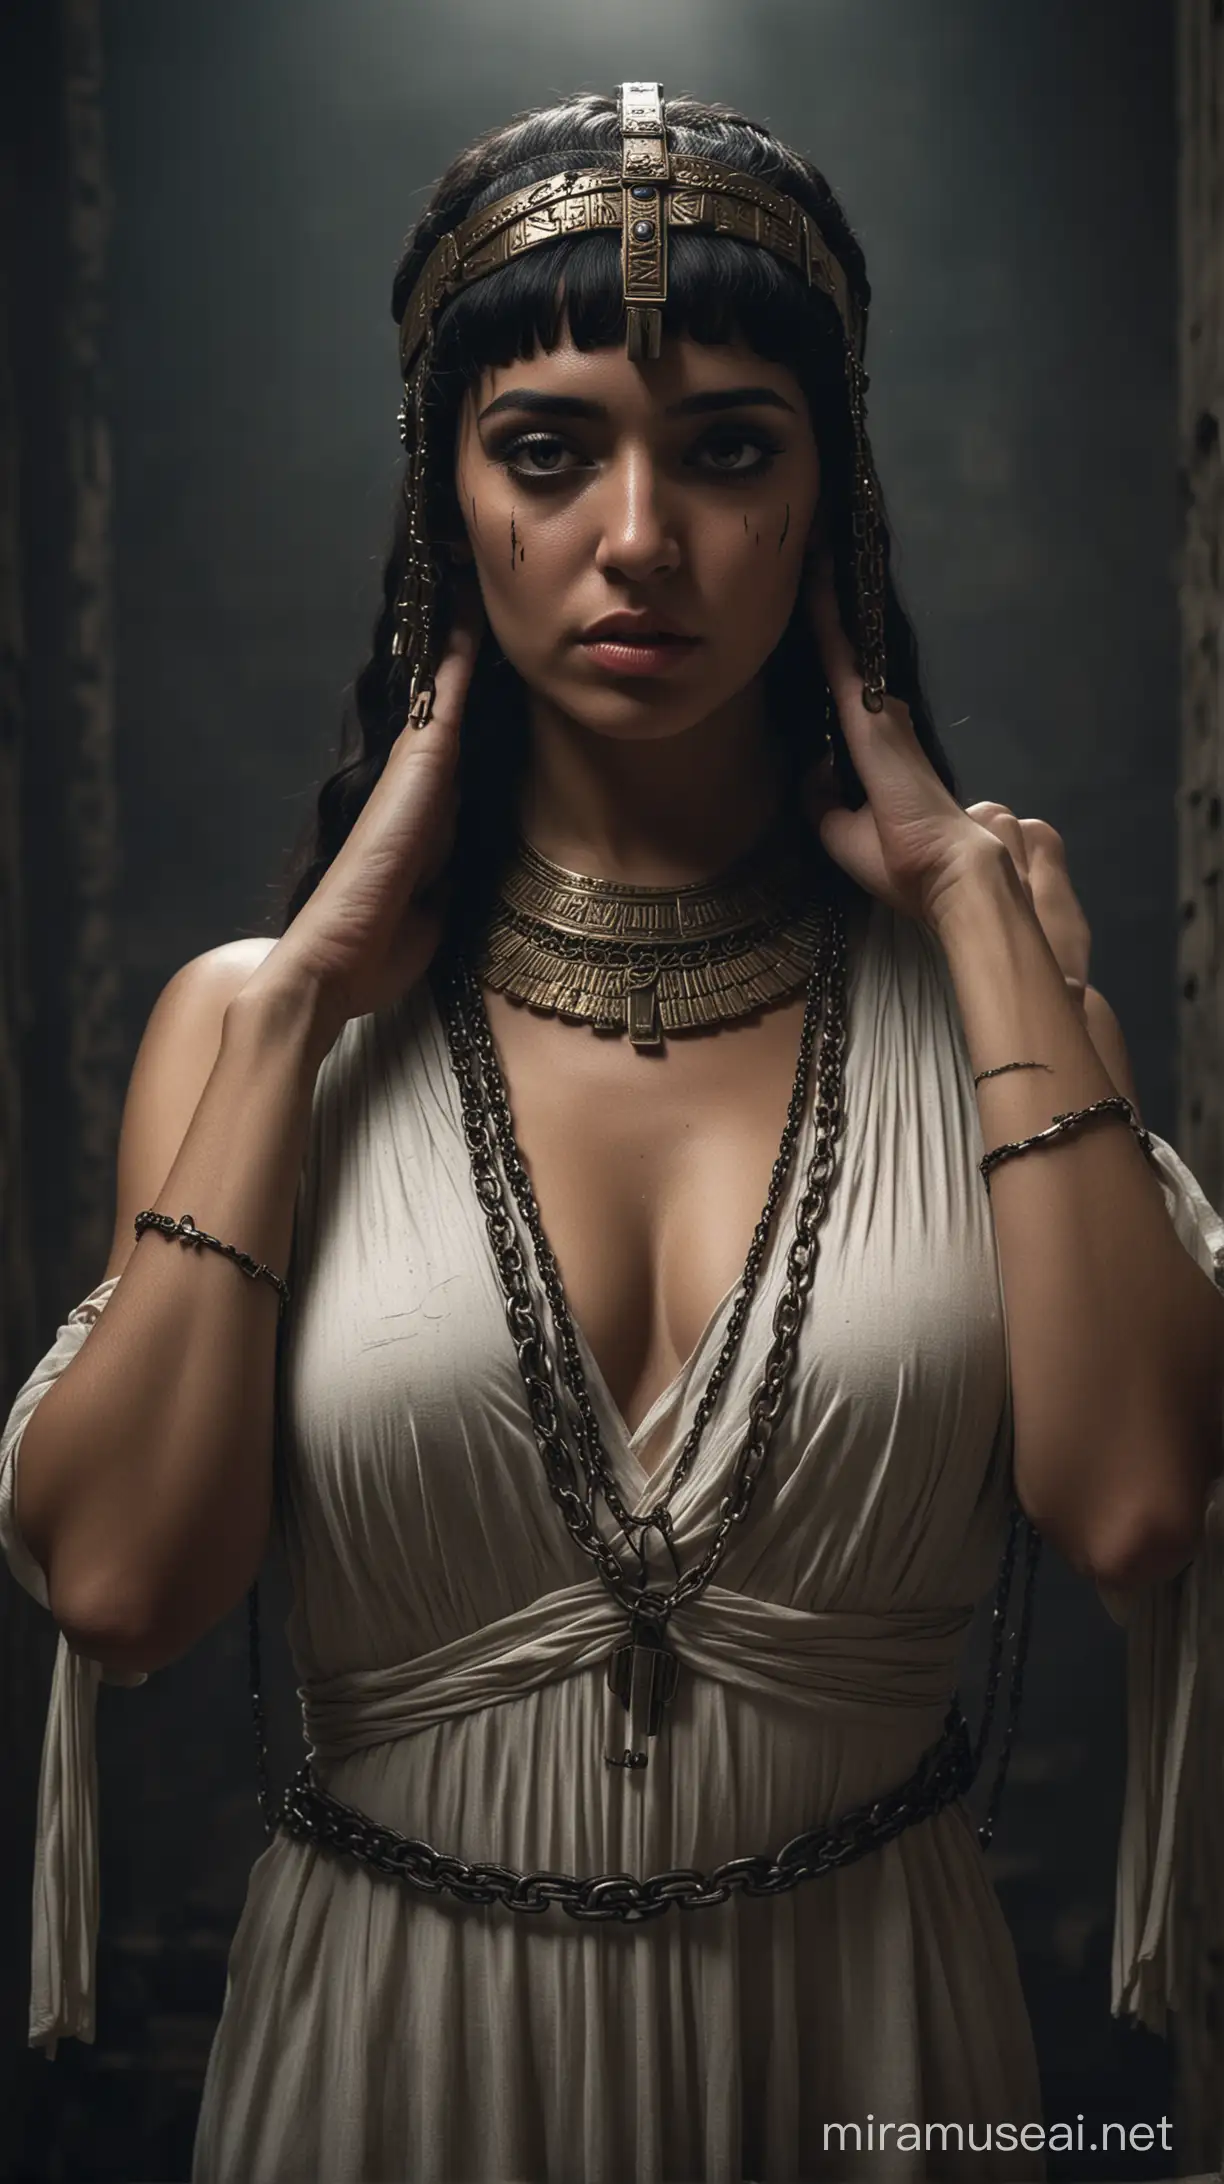 Cleopatra in Moody Captivity Chained in Dim Surroundings